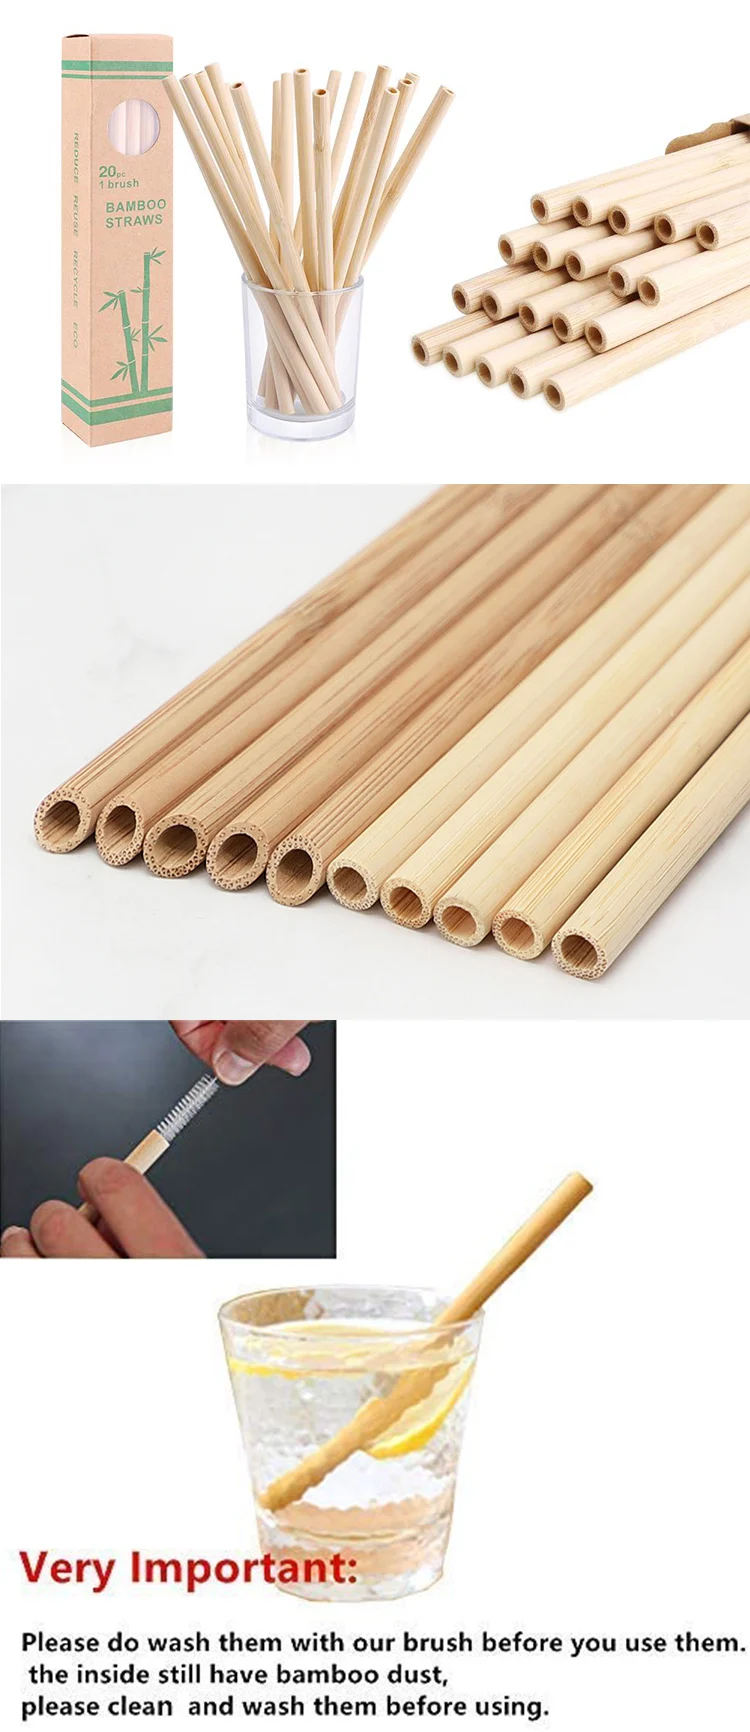 Straw Long Eco Friendly Straws Ecological Heat Resistant